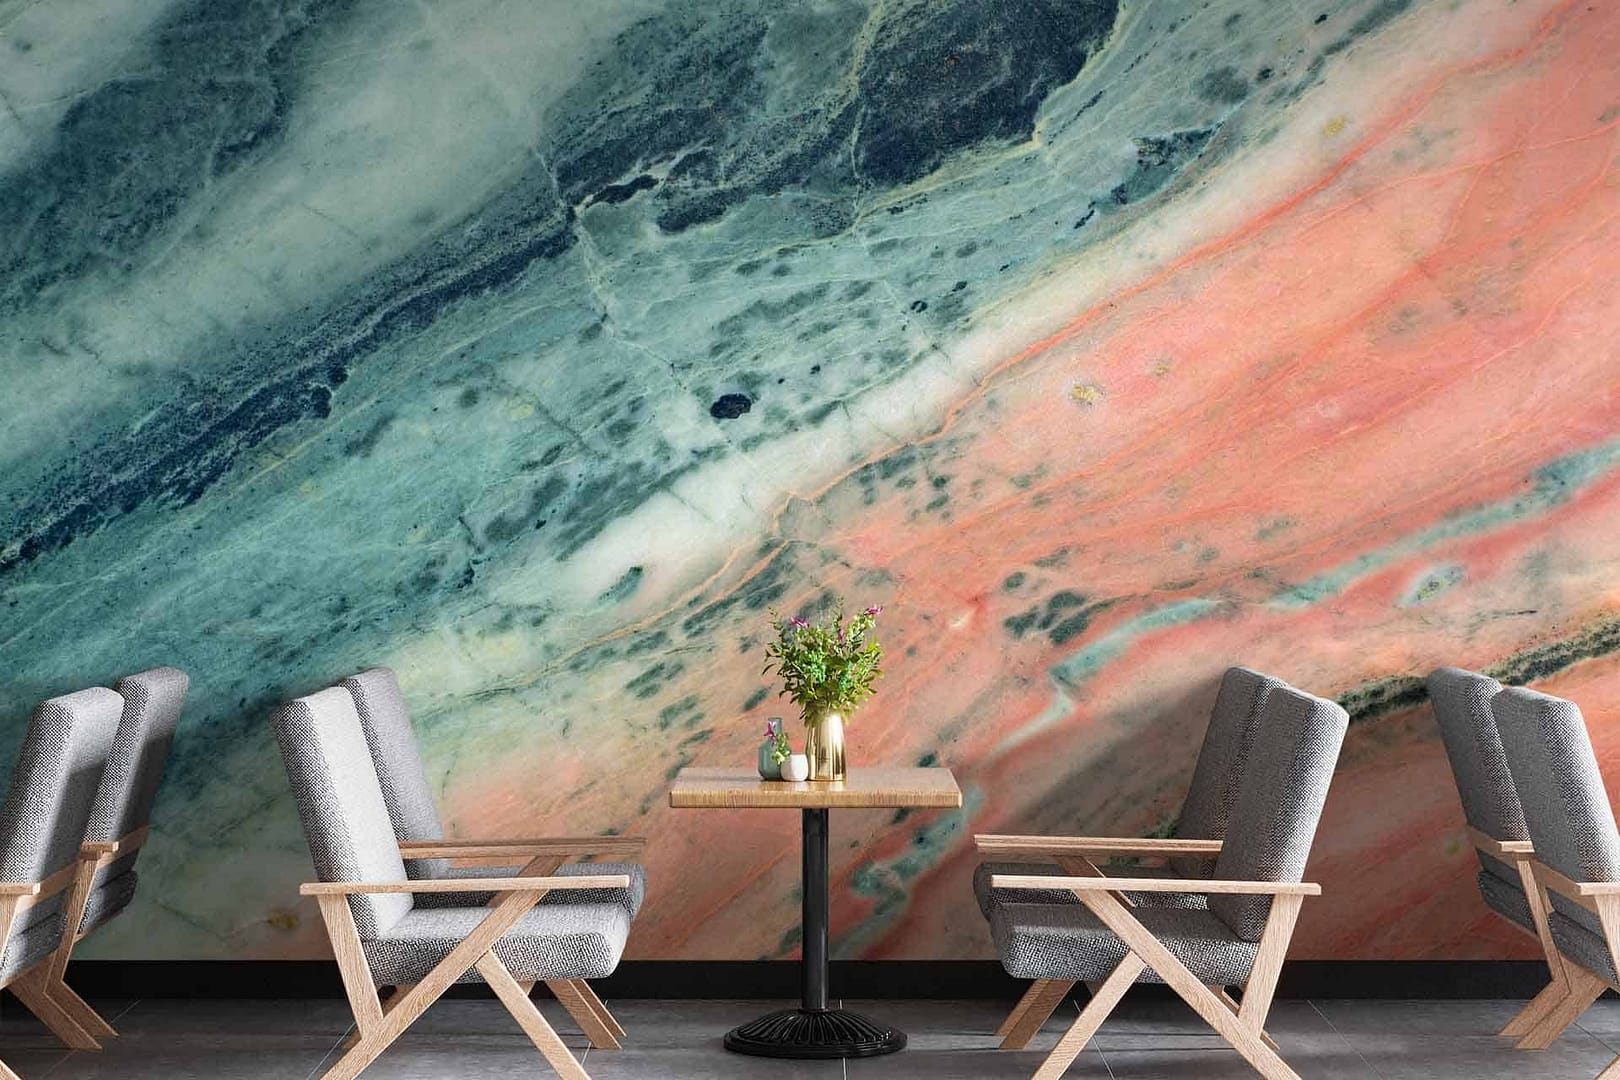 Course Of The Heart - a wallpaper of colourful marble in blue and pink tones by Cara Saven Wall Design